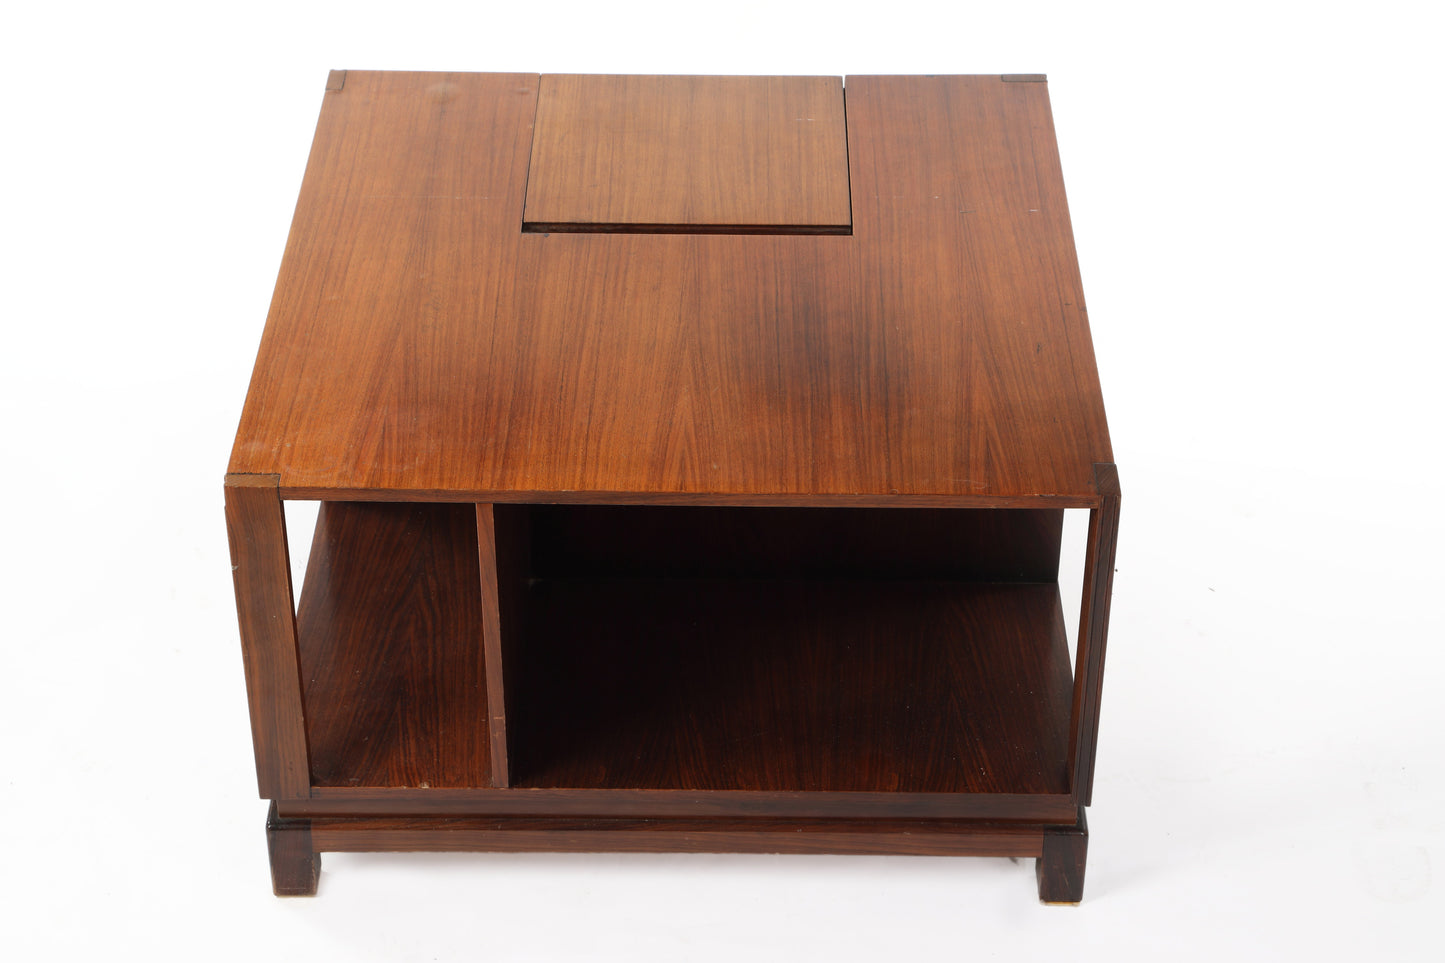 Rosewood living room table from the 70s